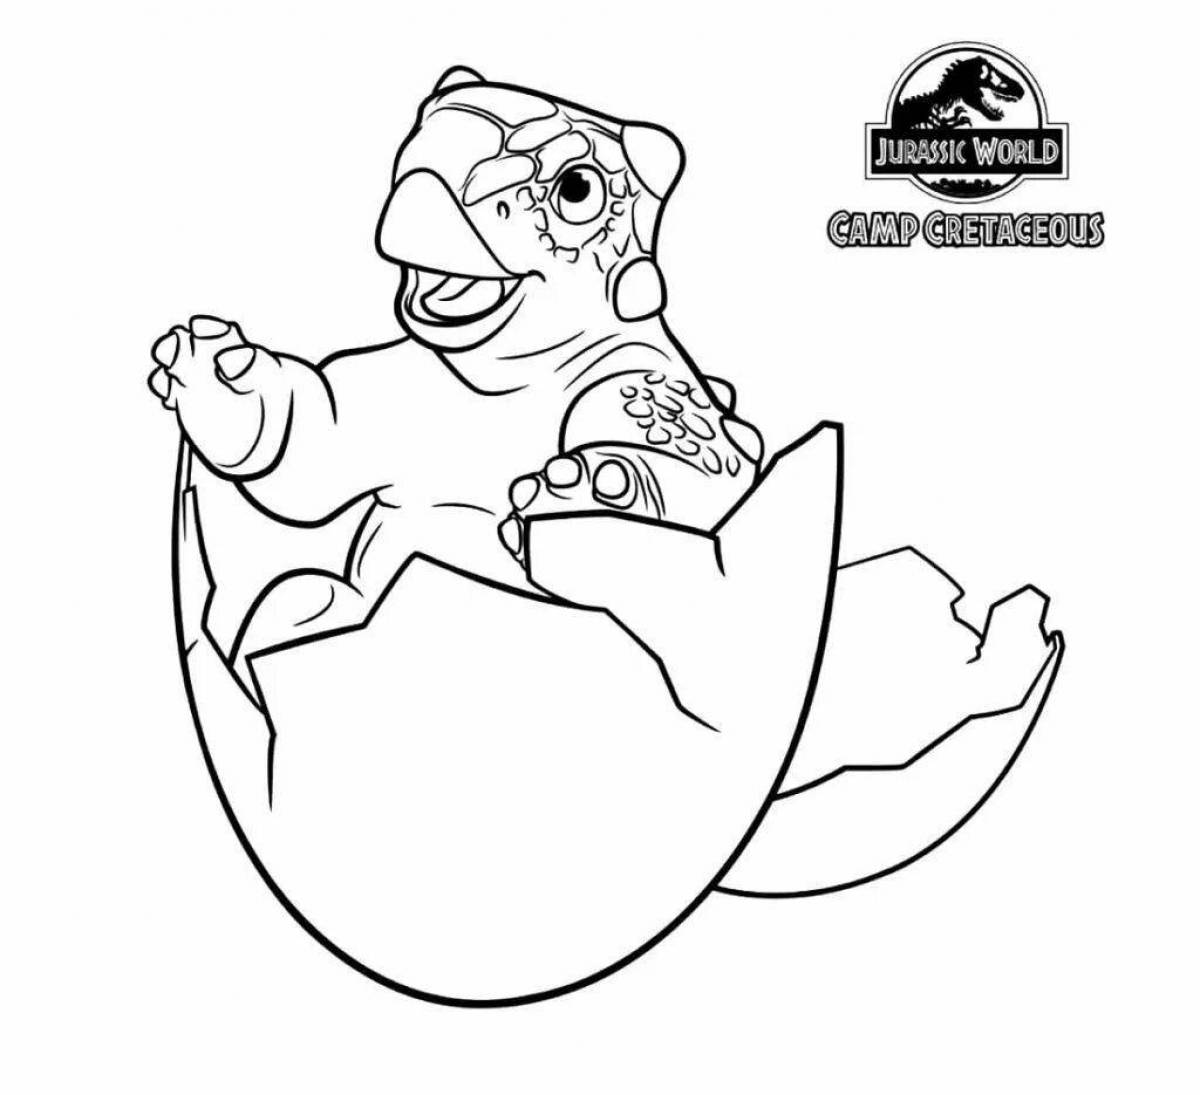 Exquisite Jurassic World coloring book